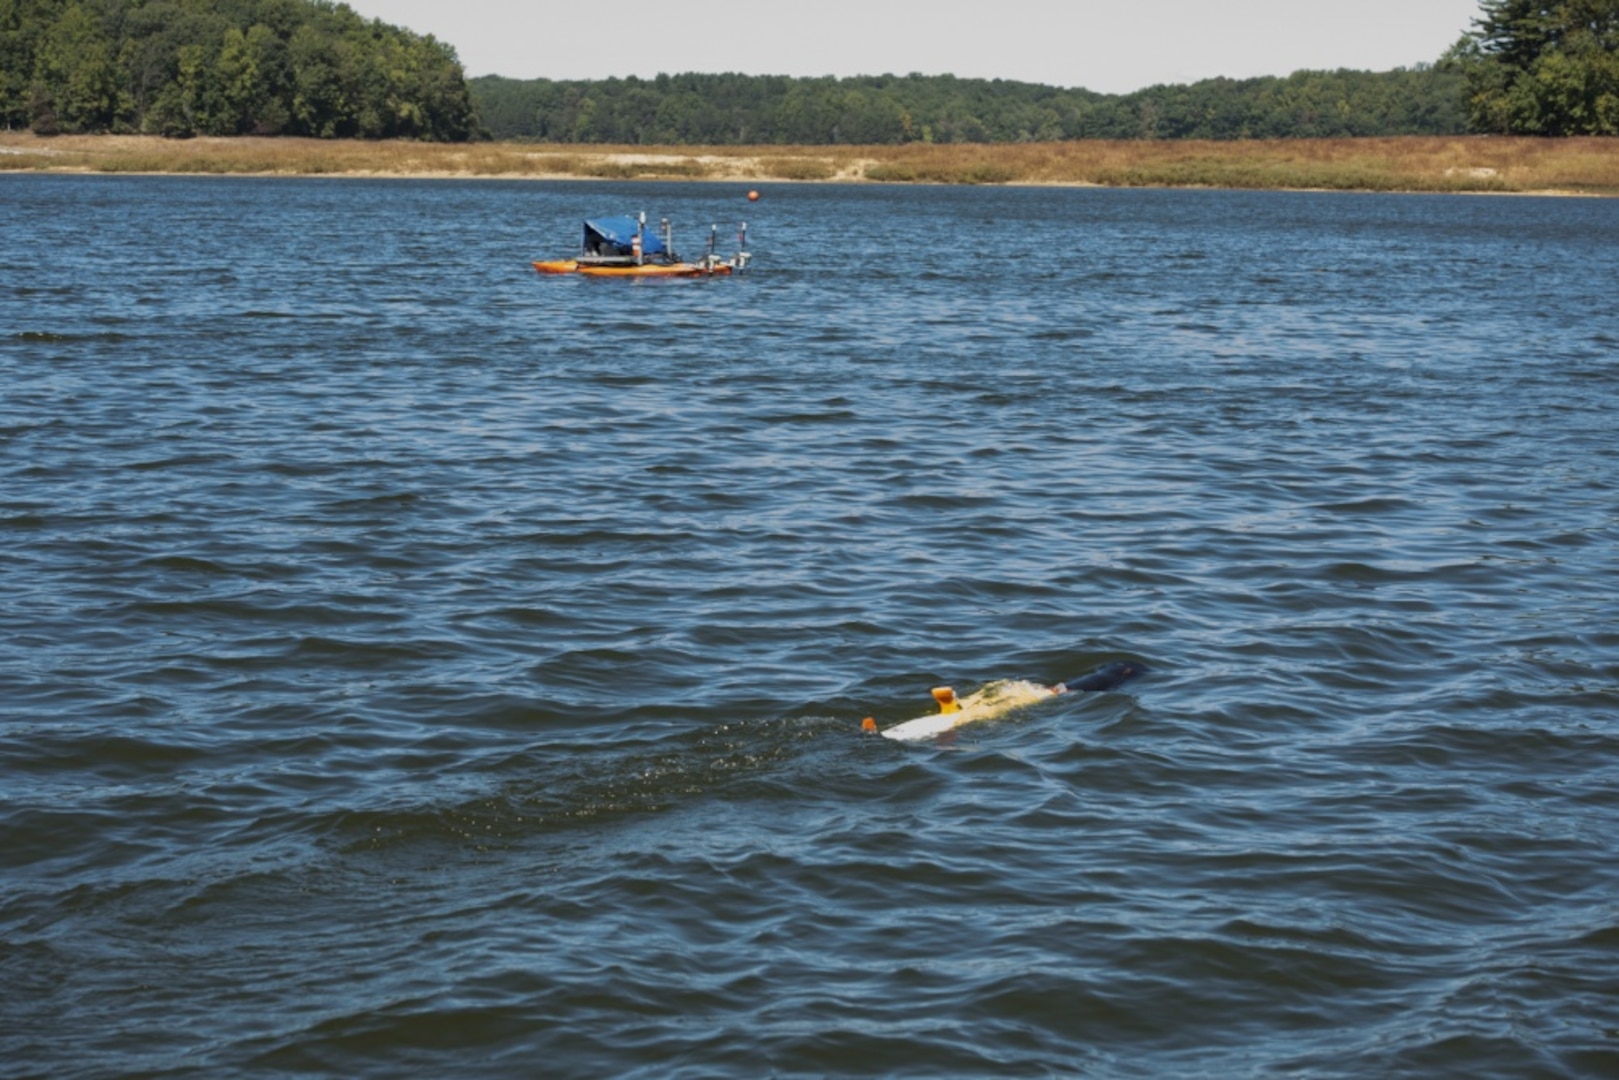 A kayak catamaran unmanned surface vehicle follows an unmanned underwater vehicle in Triadelphia Reservoir in Brookeville, Md., Sept. 28, 2017, during a joint integrated autonomous demonstration with engineers from the Naval Oceanographic Office at the John C. Stennis Space Center in Mississippi controlling the test with supervision and assistance from colleagues on station from Naval Surface Warfare Center, Carderock Division™s Autonomous Vehicle and Instrumentation Group. (U.S. Navy photo by Ryan Hanyok/Released)